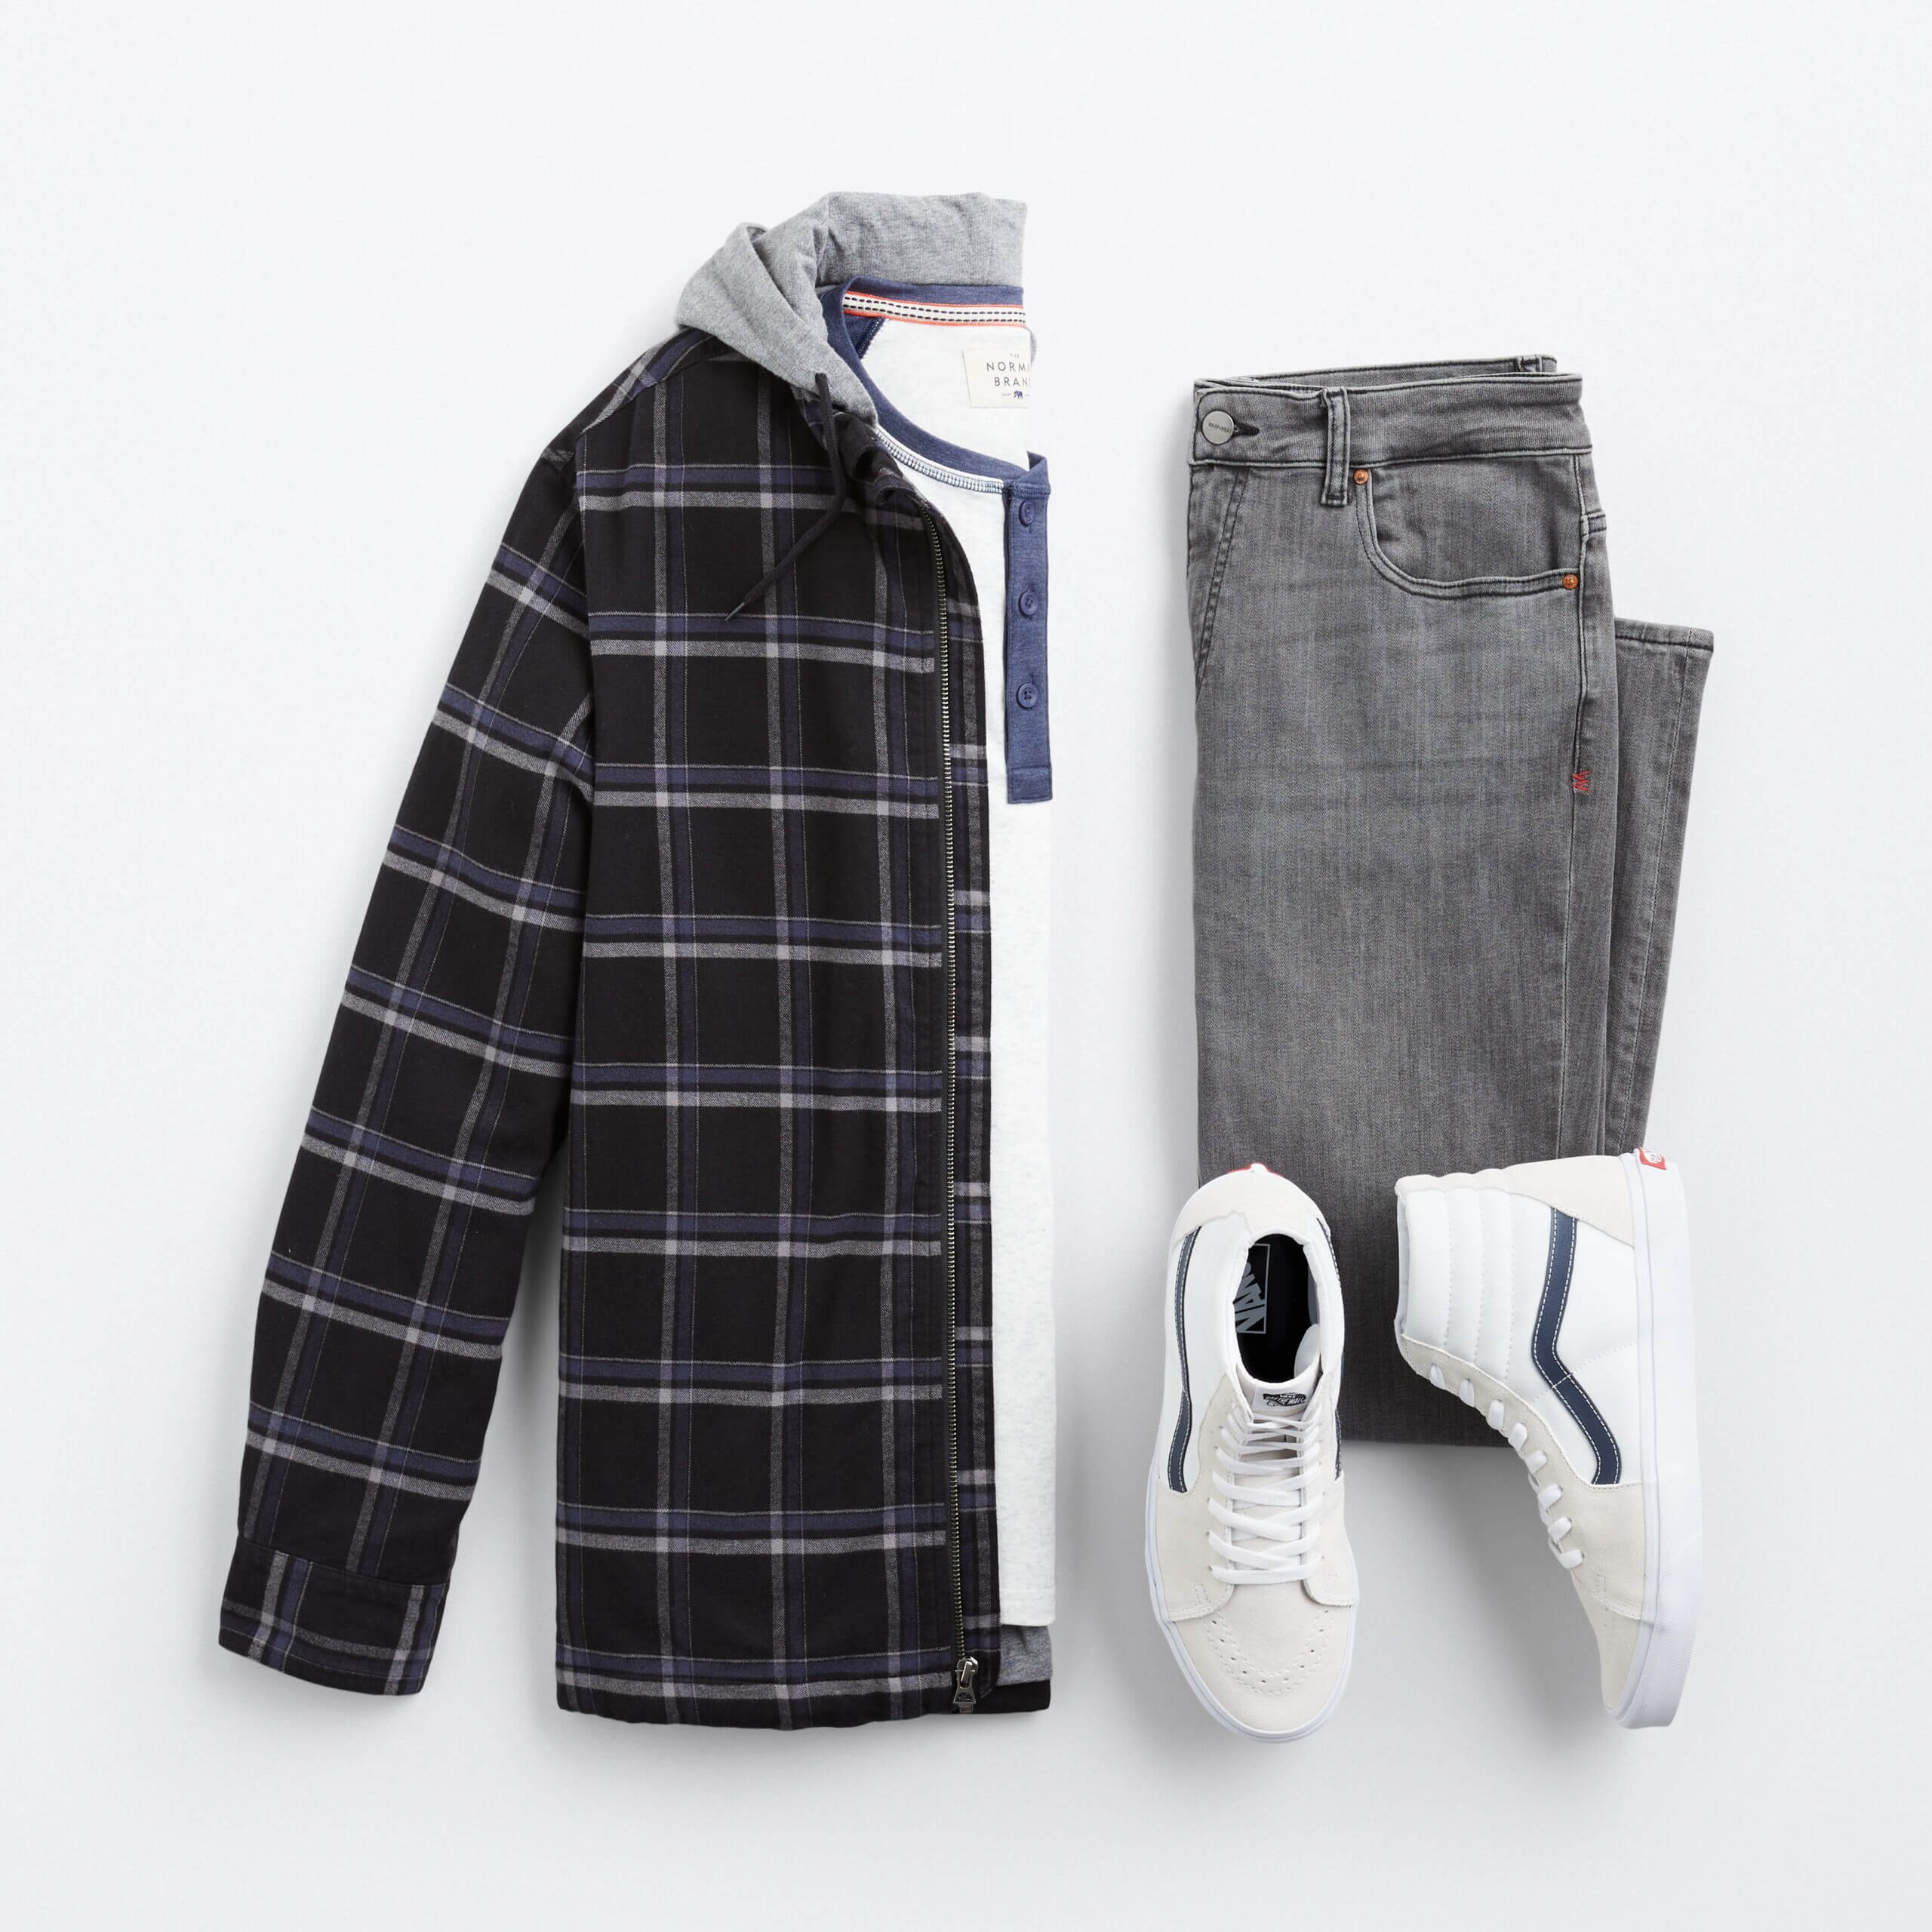 Stitch Fix men's outfit laydown featuring grey jeans, white high-top sneakers, white henley and black hooded flannel. 